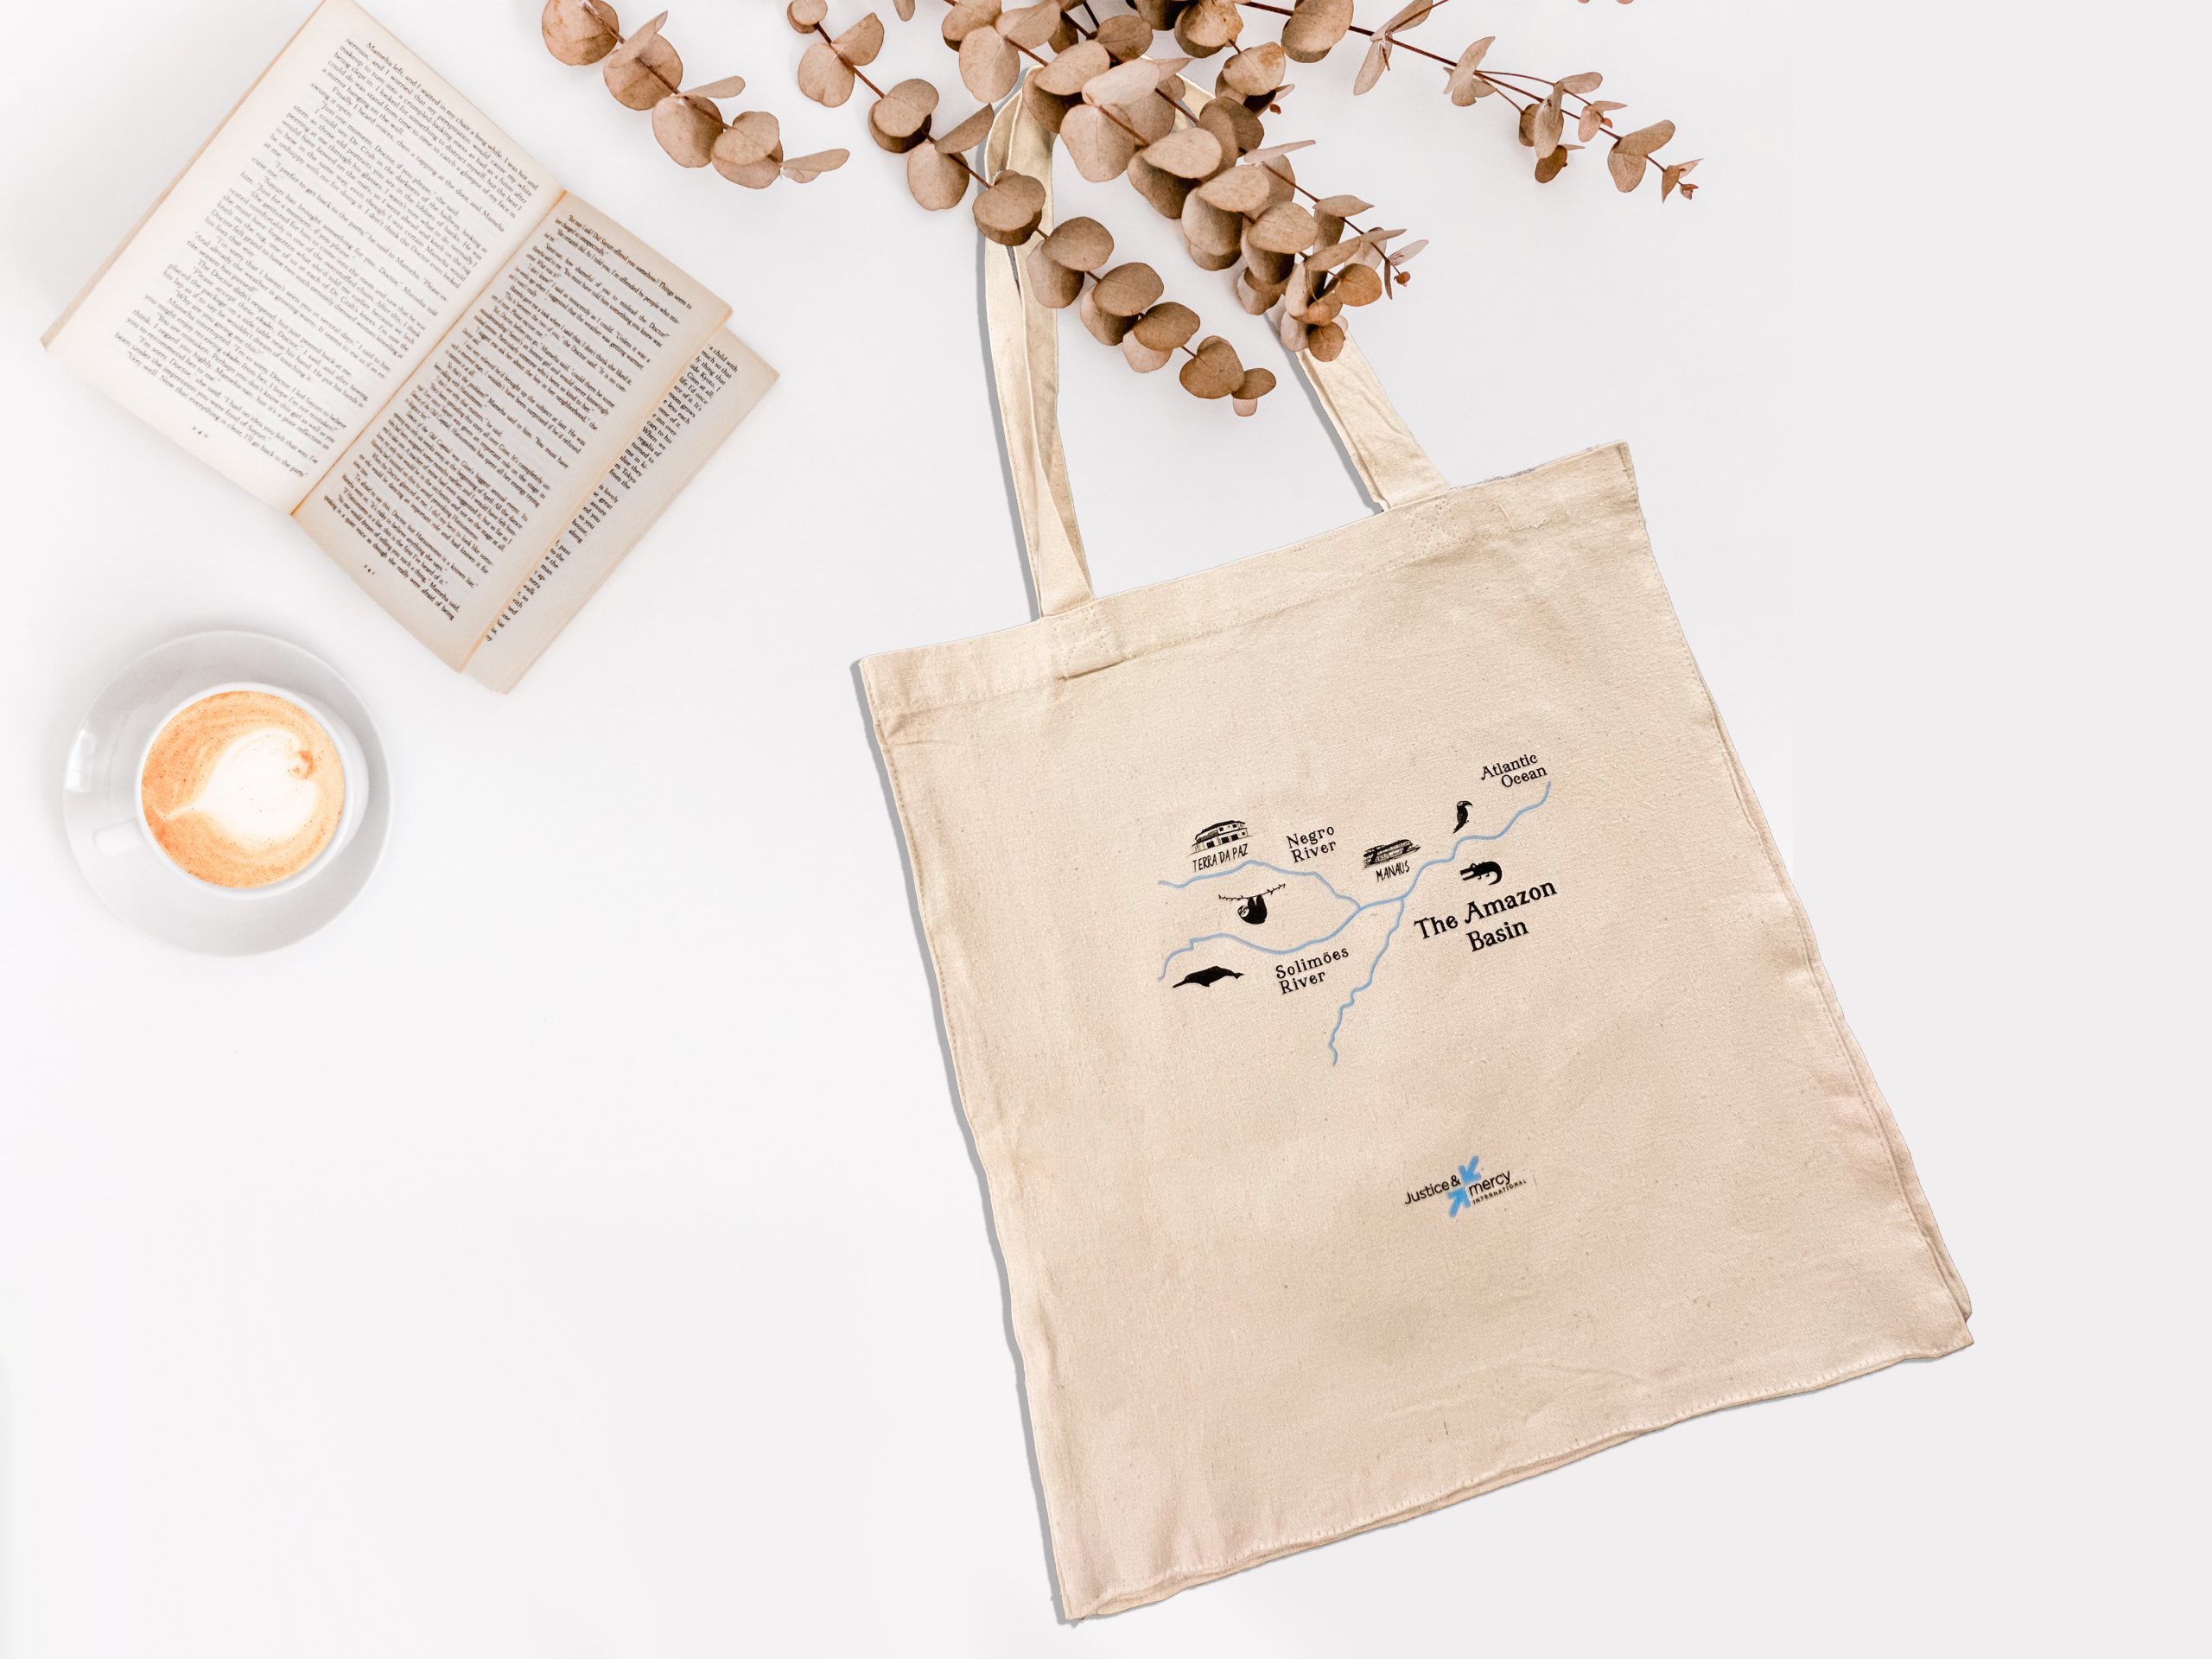 Canvas Tote Bag - Justice & Mercy International